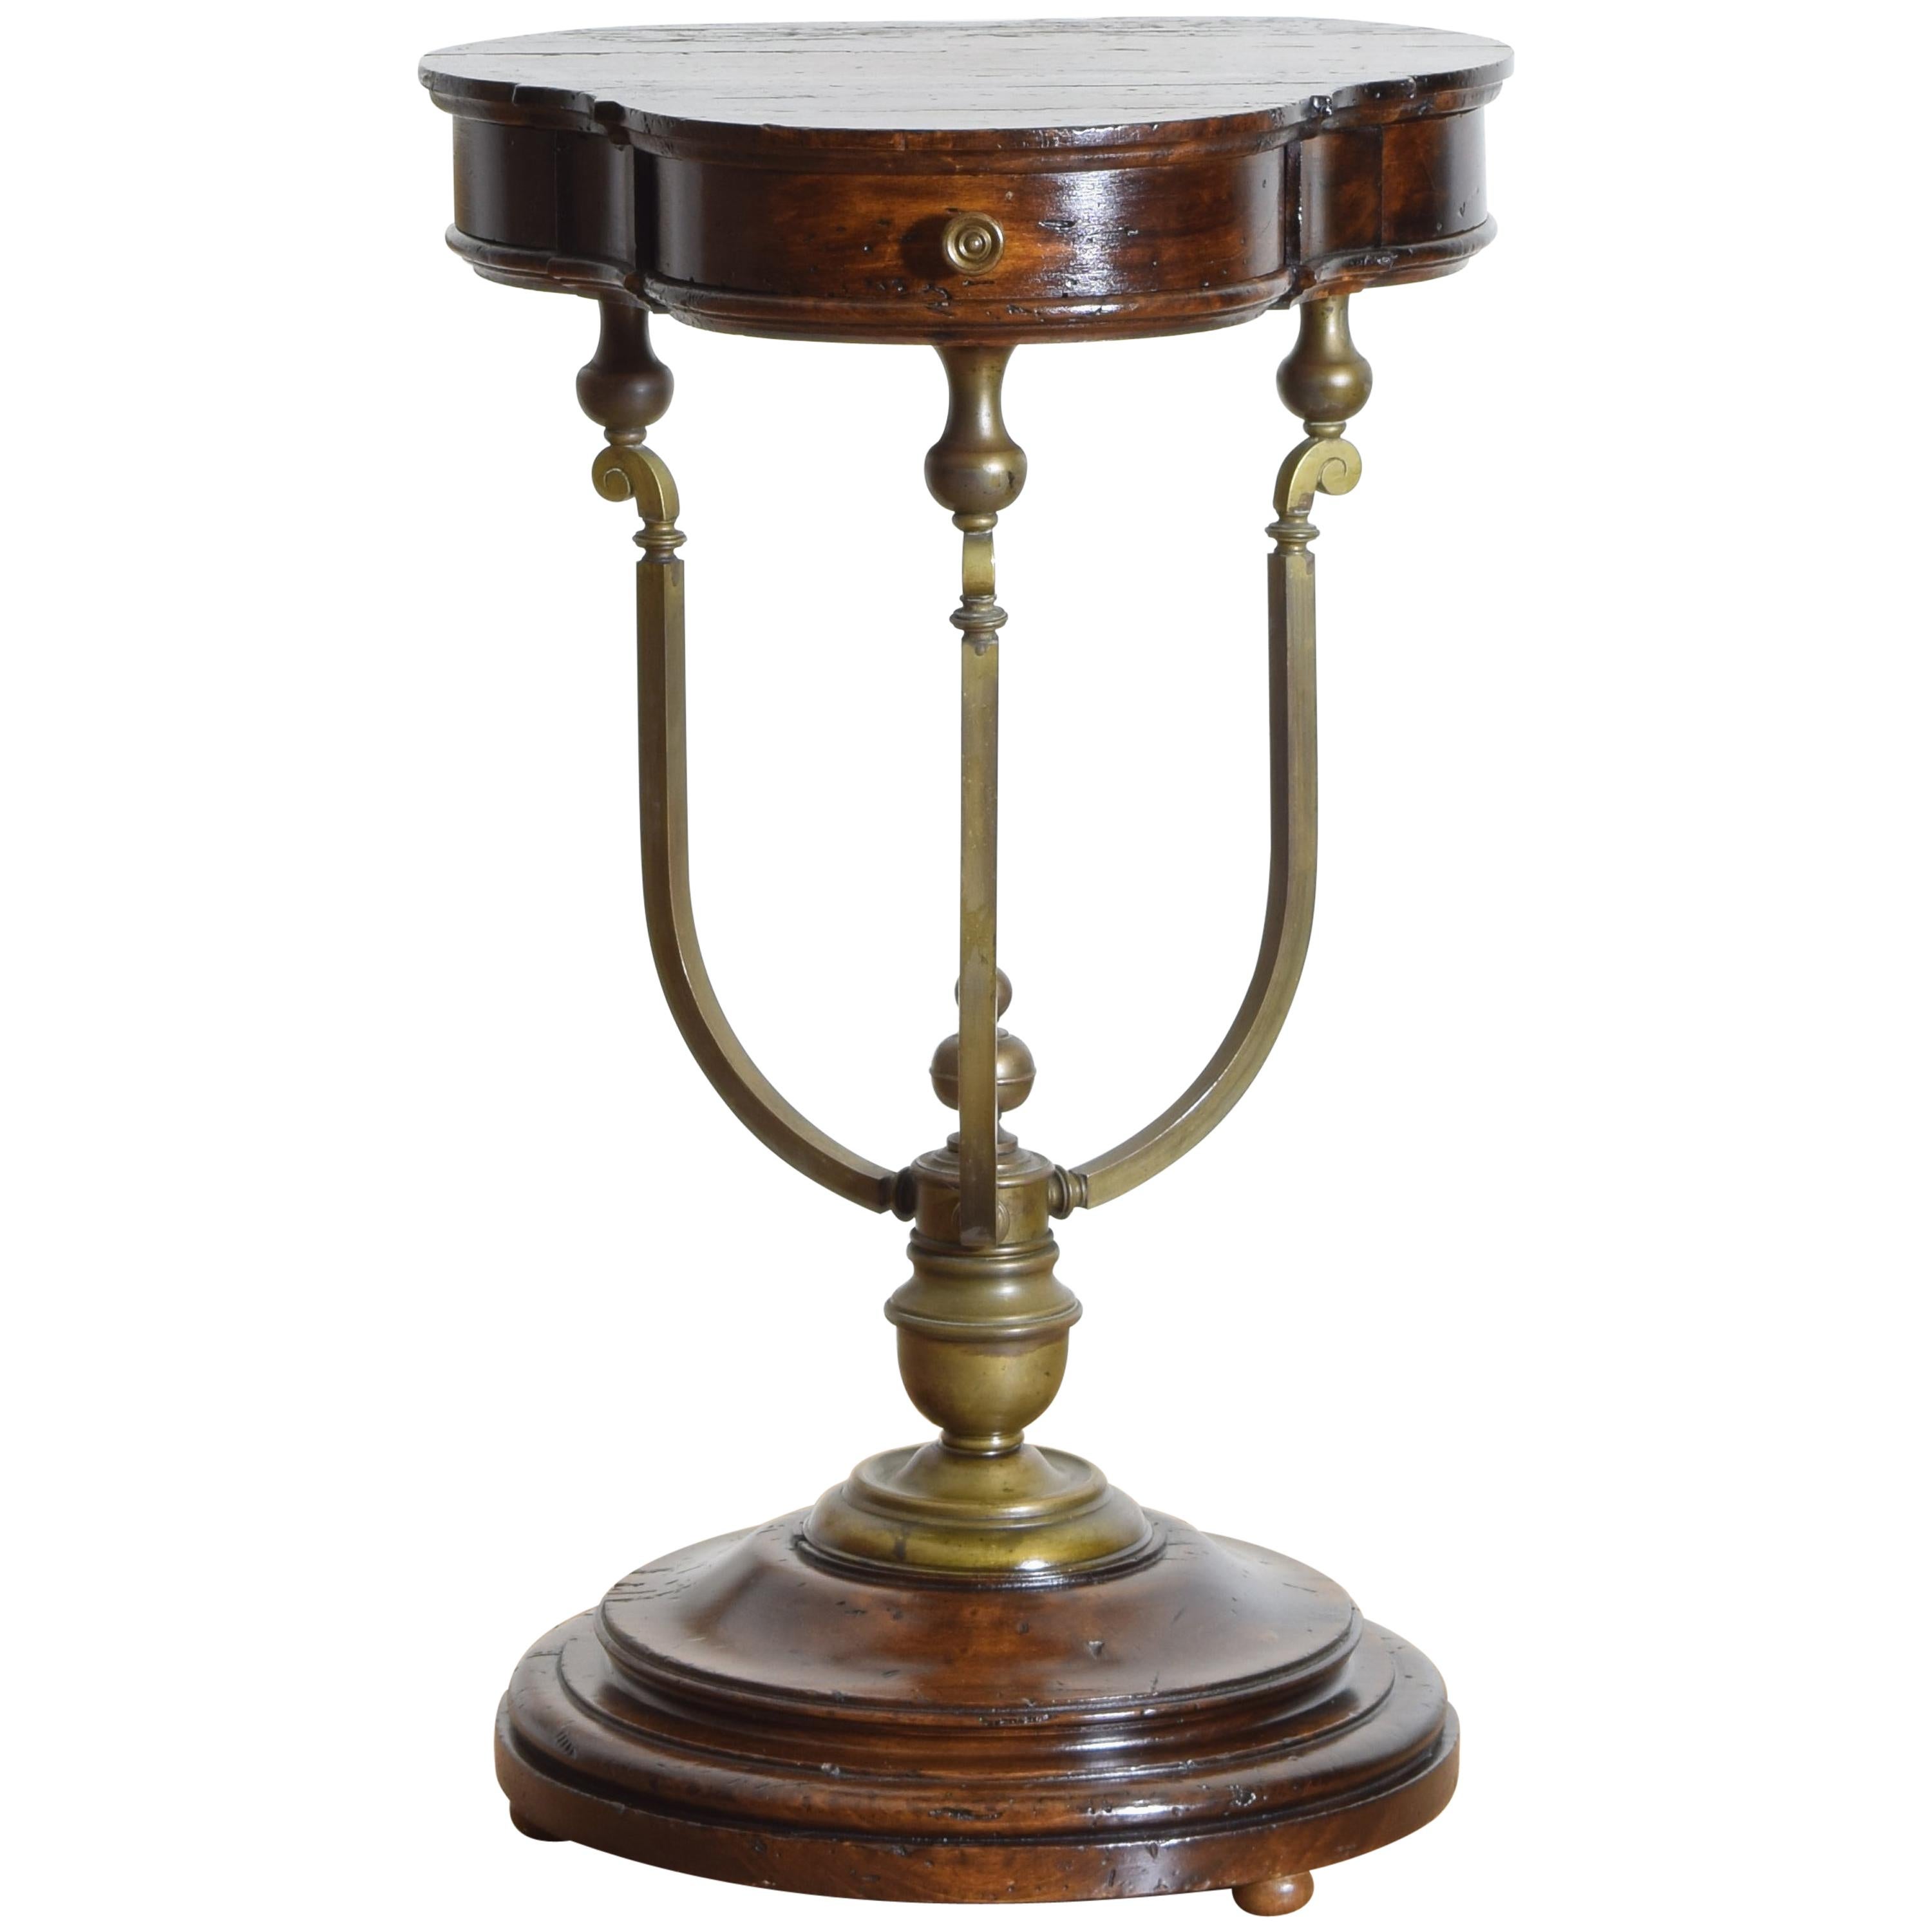 Italian Walnut and Brass Trefoil Shaped 3-Drawer Table, Early 20th Century